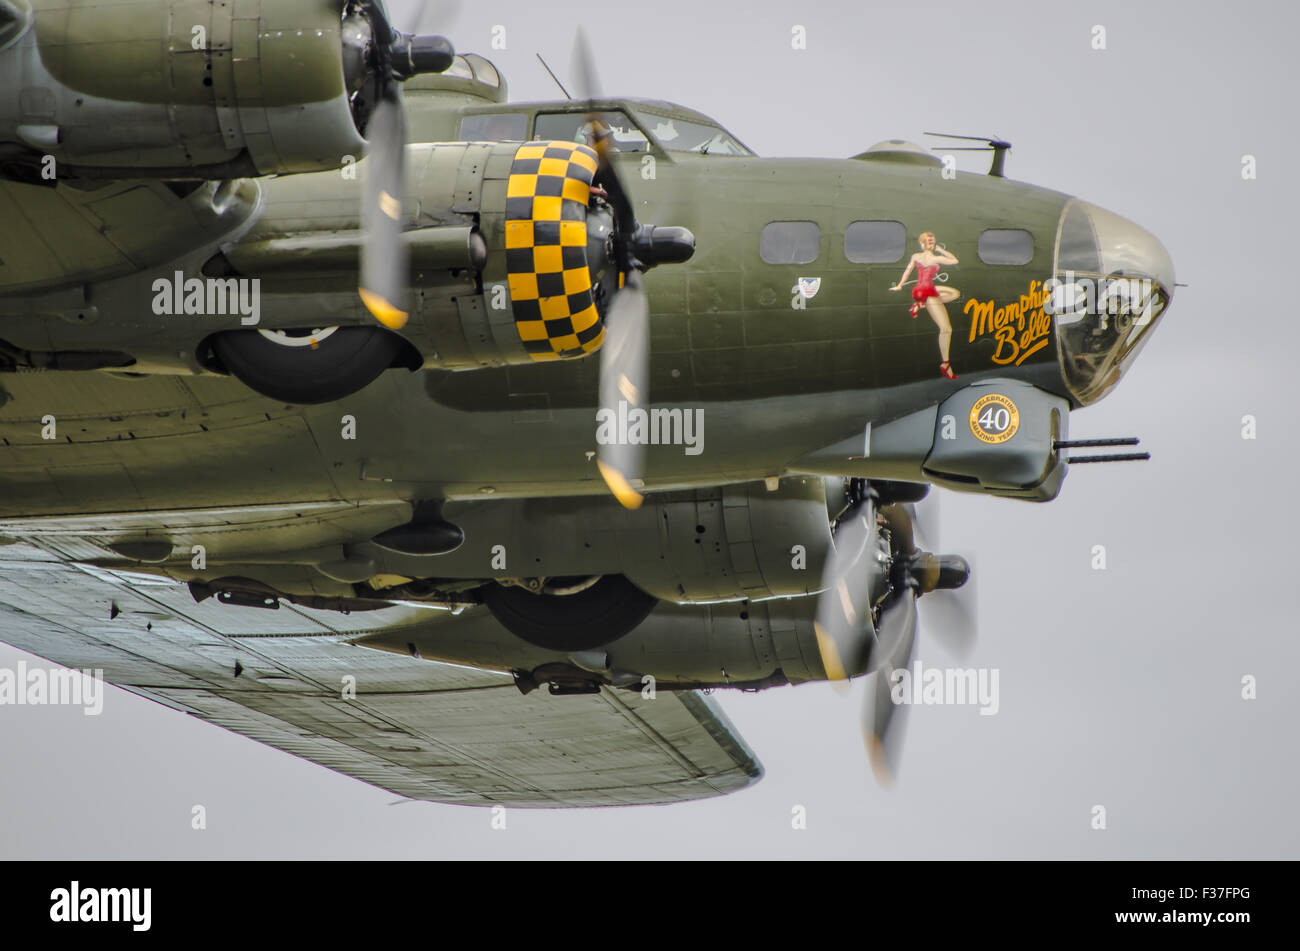 Boeing B-17 'Sally B' still carrying the nose art 'Memphis Belle' from the film of the same name Stock Photo